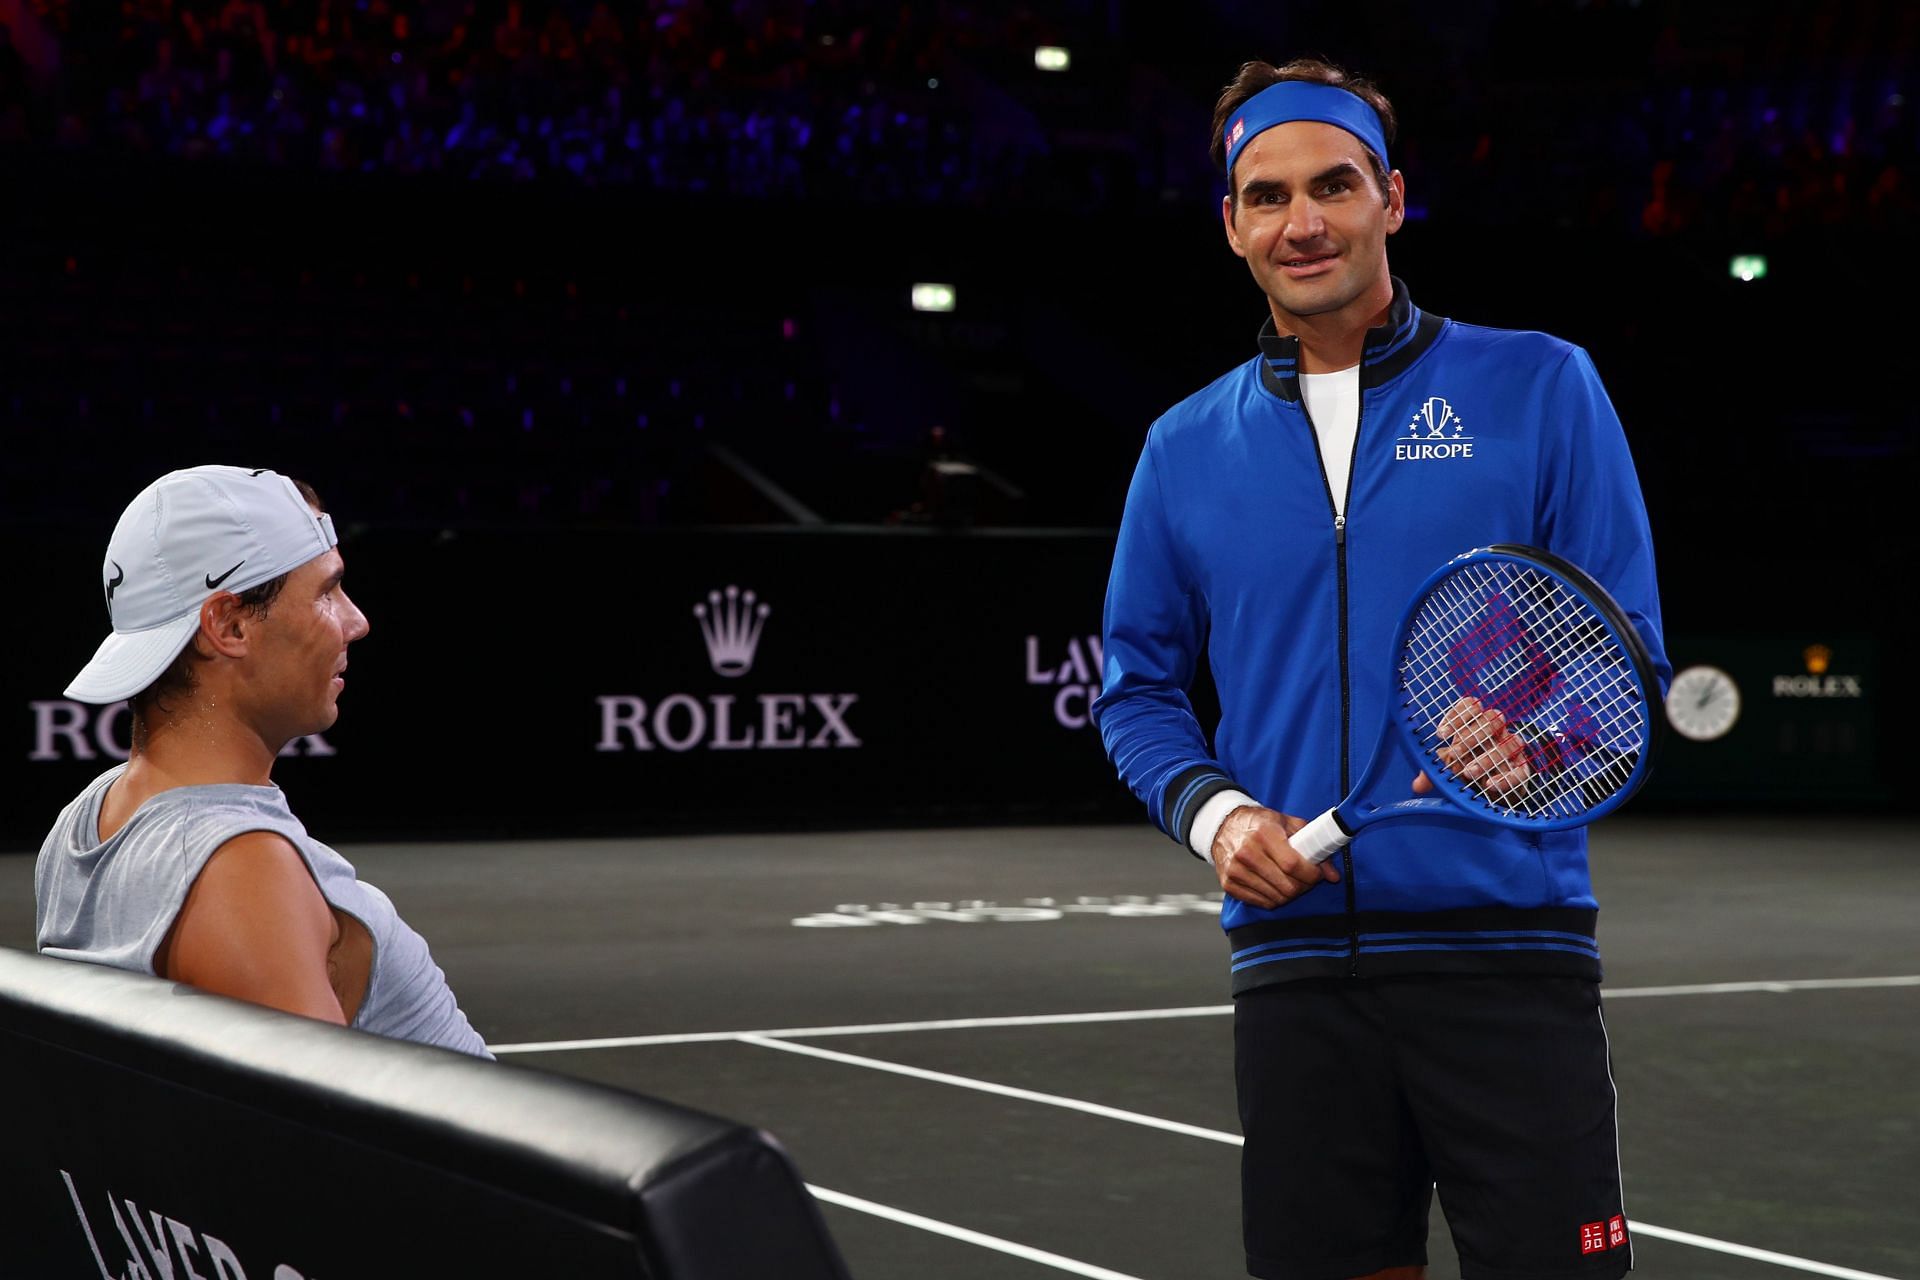 Roger Federer and Rafael Nadal during the 2019 Laver Cup